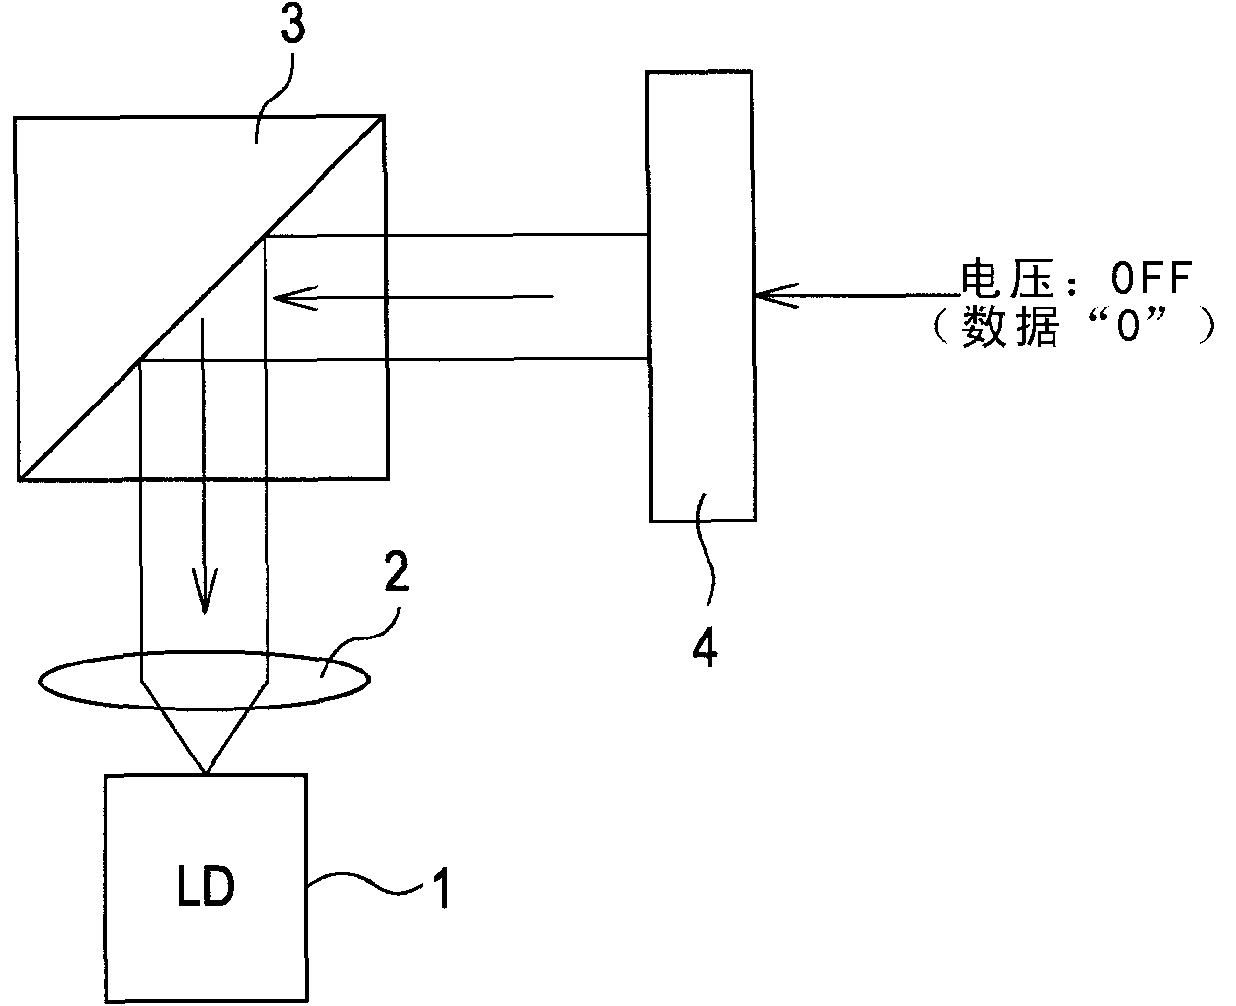 Reproducing device and reproducing method